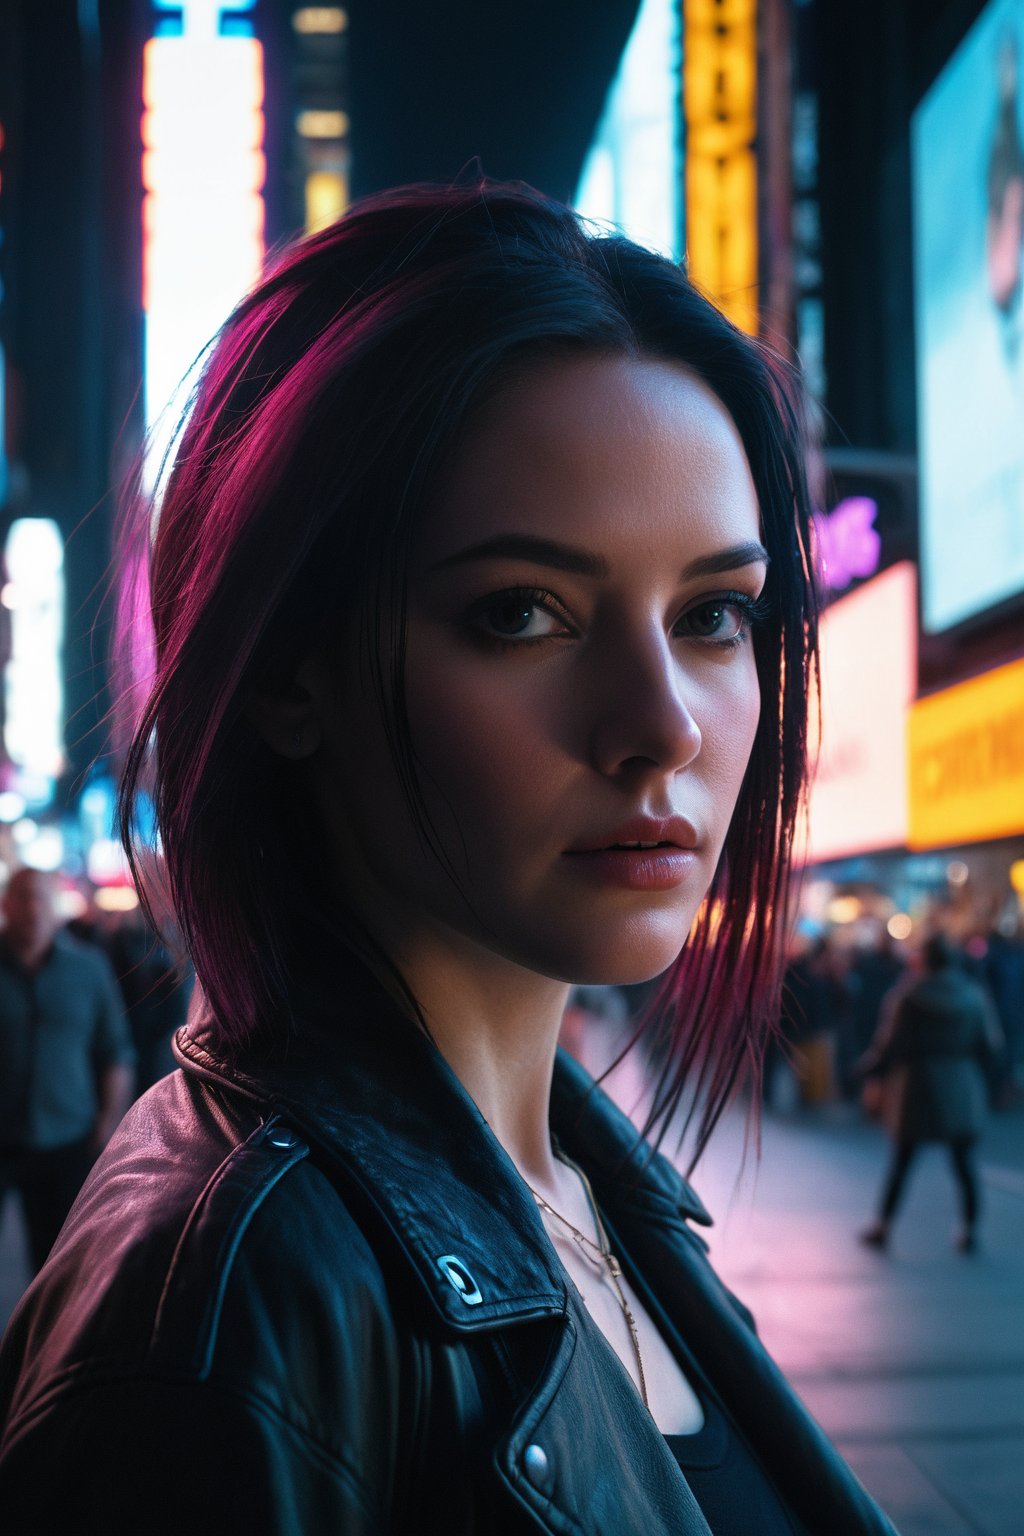 (ultra realistic,best quality),photorealistic,Extremely Realistic, in depth, cinematic light,hubgwomen,hubg_beauty_girl,

1 female detailed face time square detailed background cyberpunk shadow dramatic lighting by Bill Sienkiewicz,

intricate background, realism,realistic,raw,analog,portrait,photorealistic